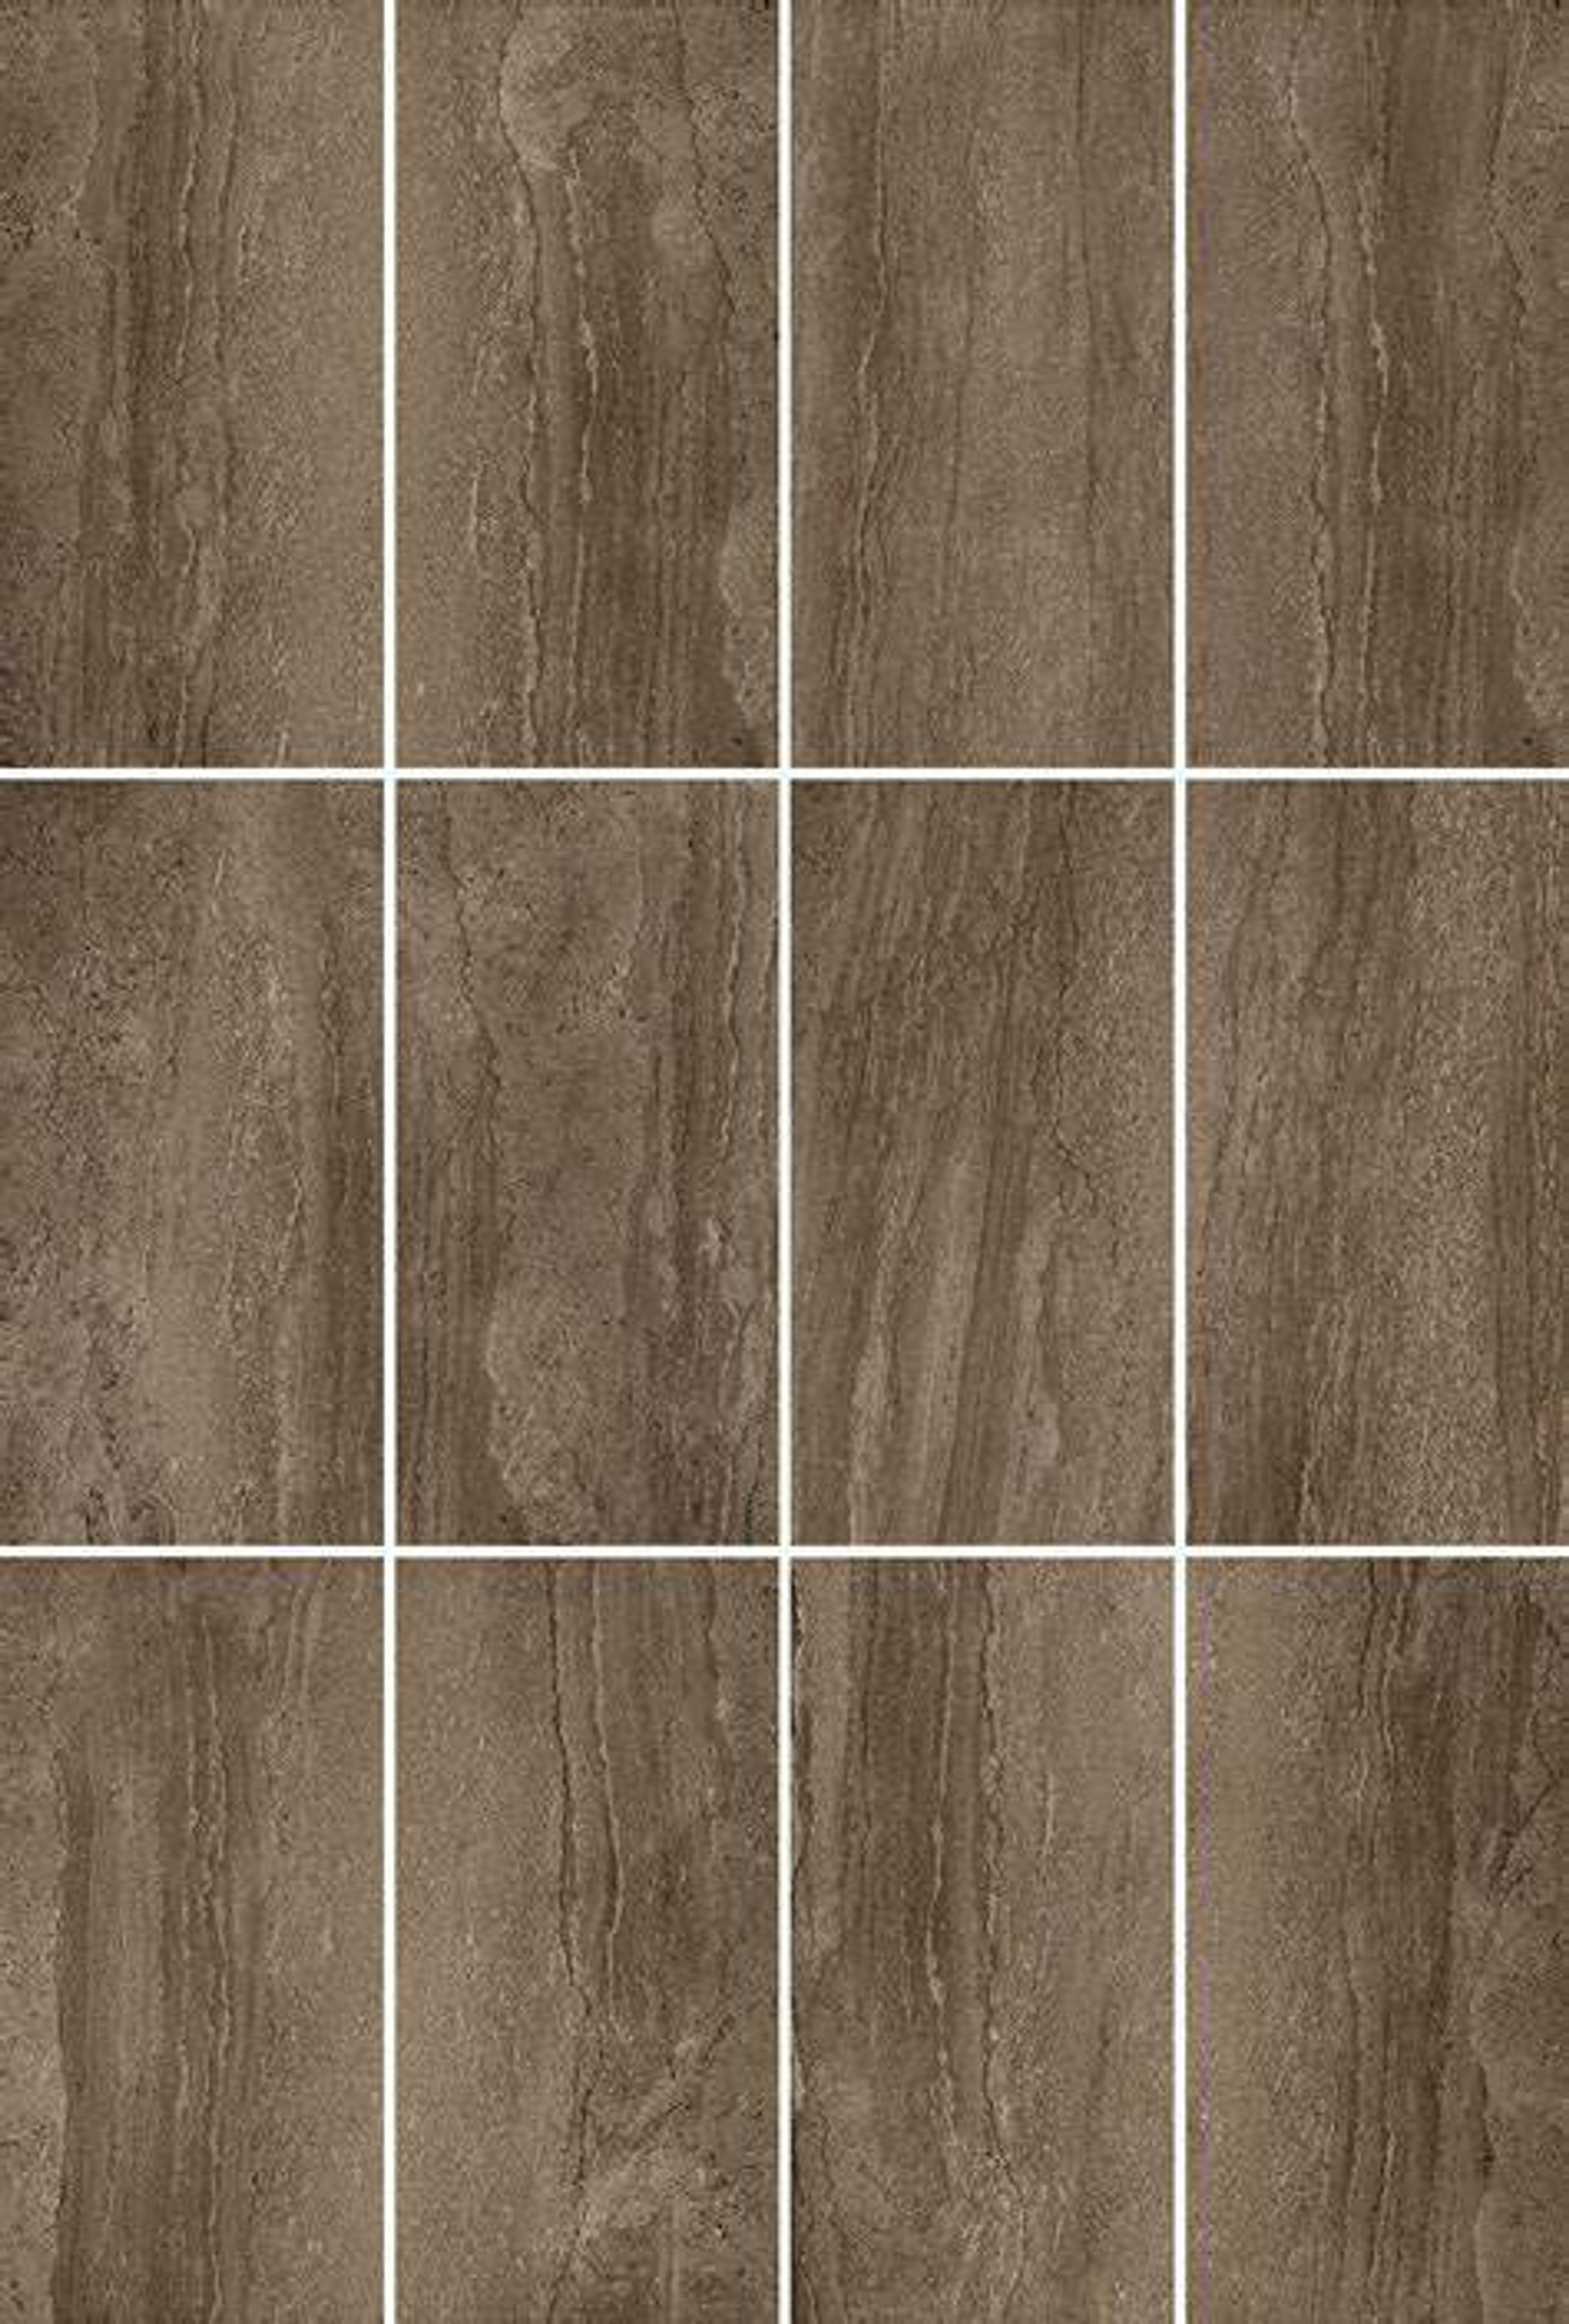 Newport Collection: Brown 12X24, 6x24, Matching Bullnose Porcelain Tile